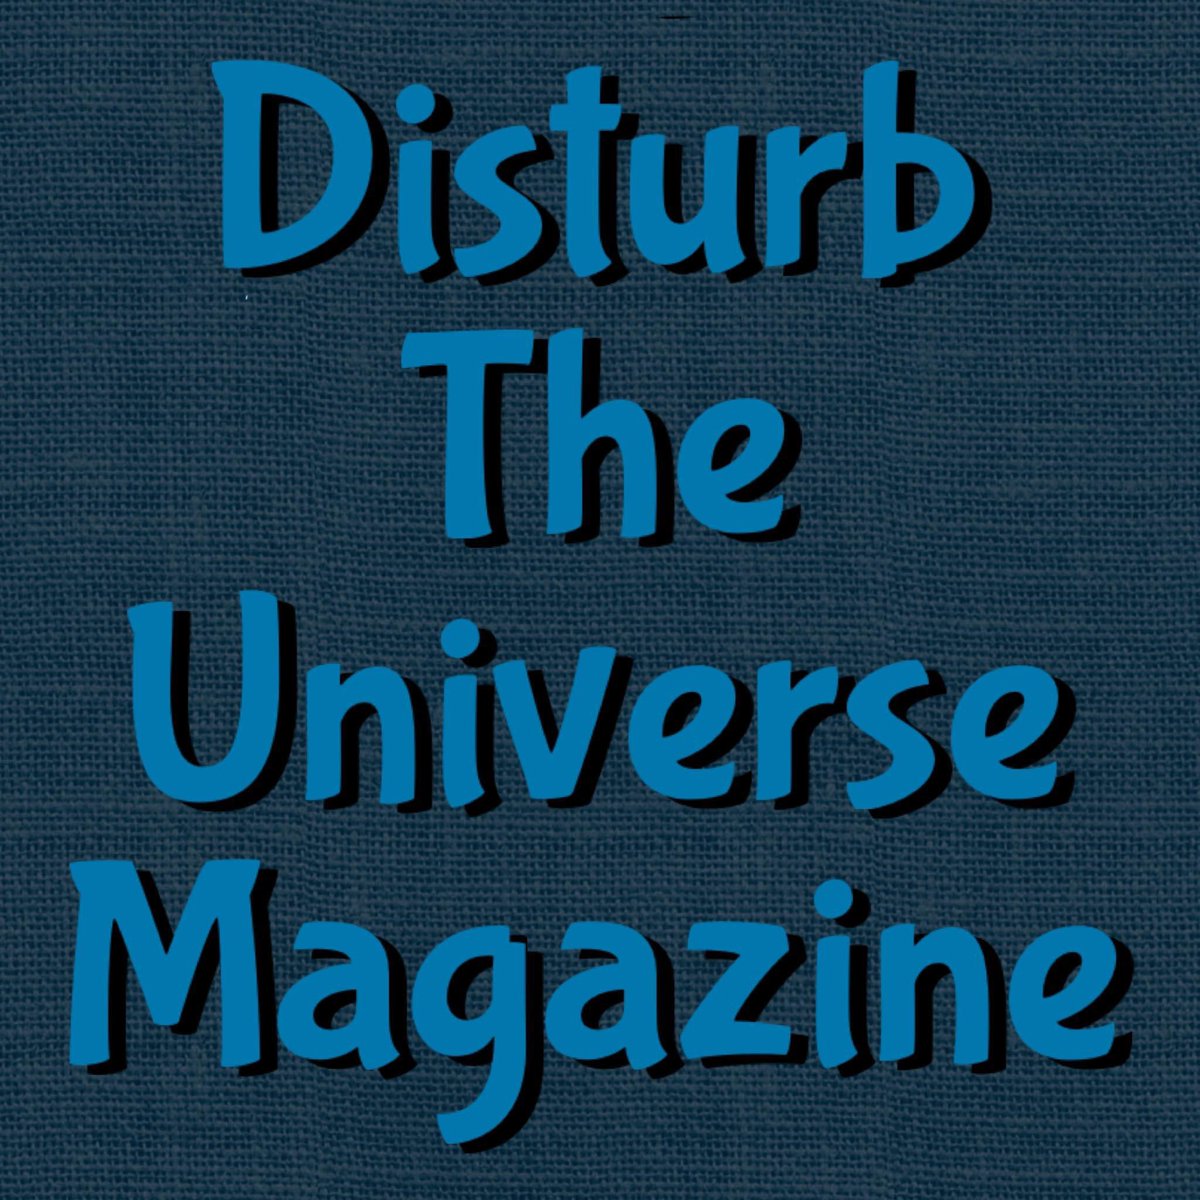 Up today at Disturb The Universe Magazine 

Selfish Art by Marc Darnell

disturbtheuniversemagazine.com/2024/05/selfis…

#publishedwriting #disturbtheuniversemagazine #published #writingcommunity #poetry #writing #publishedpoetry #poetrylovers #poetrytwitter #poetrycommunity